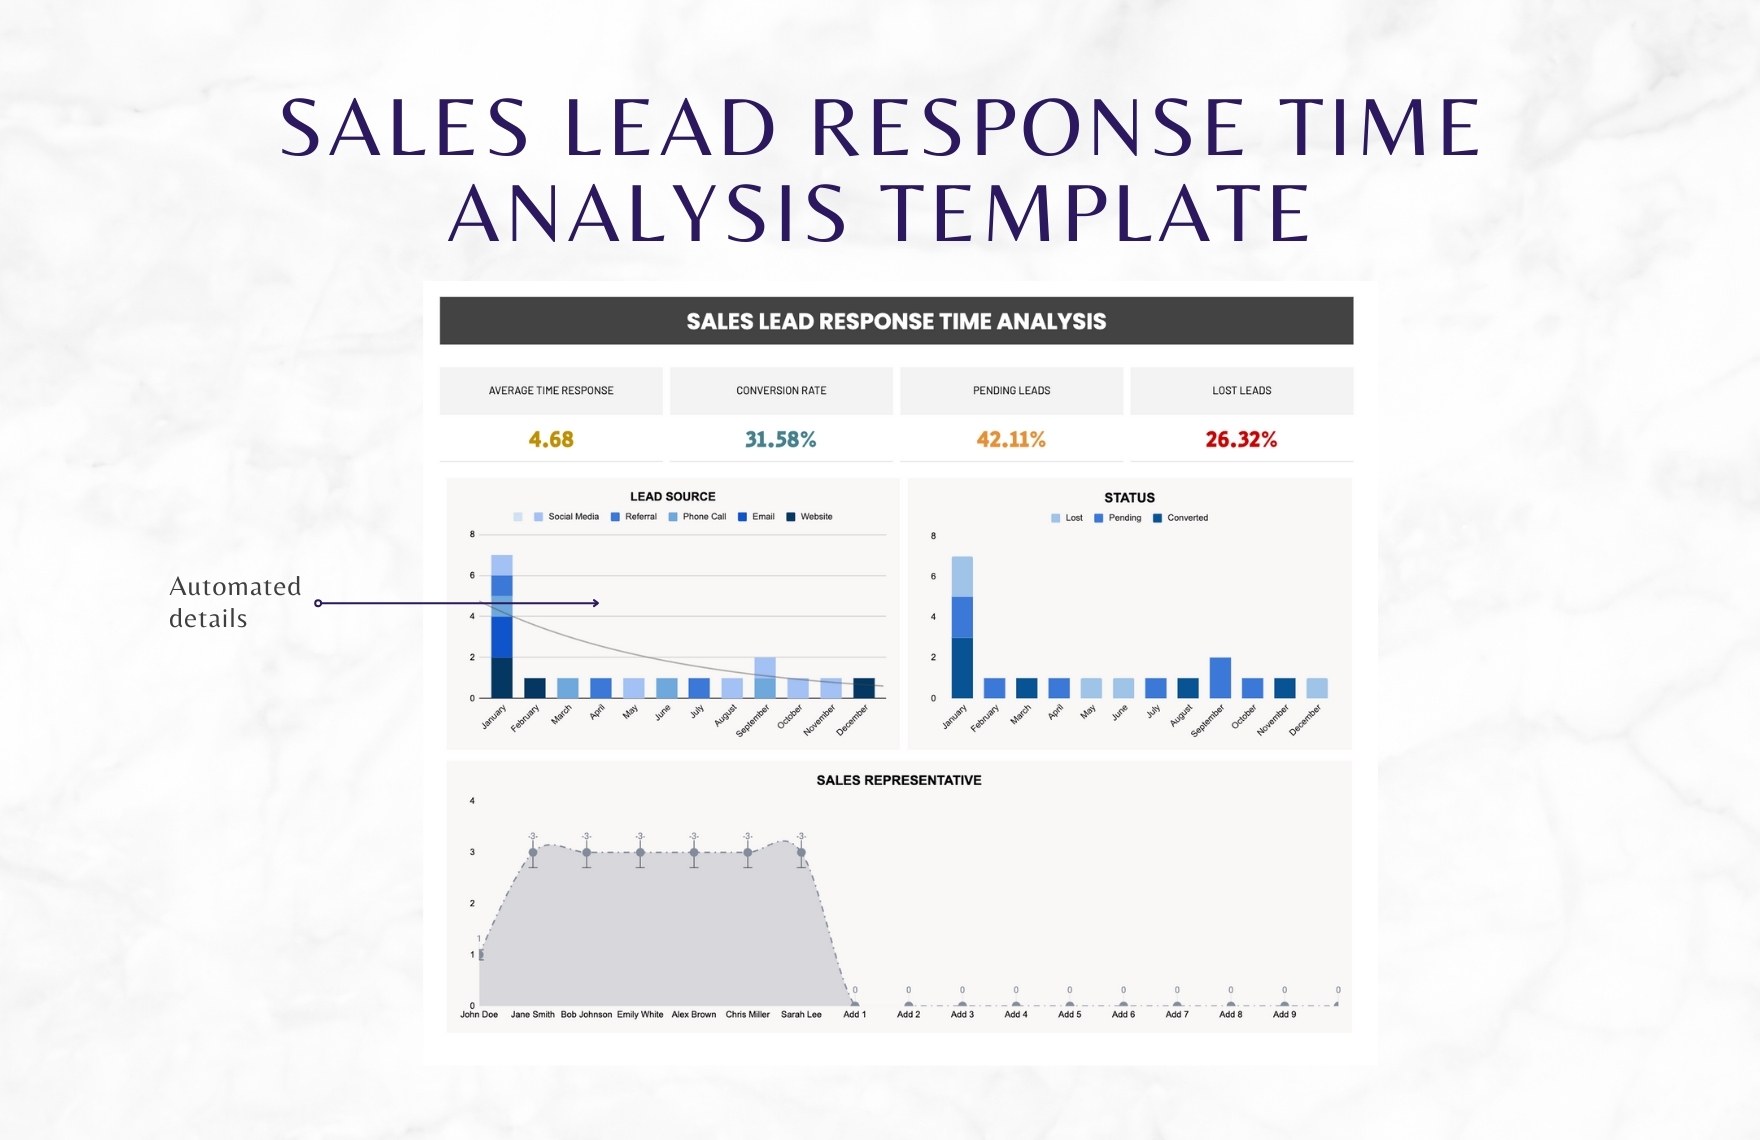 Sales Lead Response Time Analysis Template